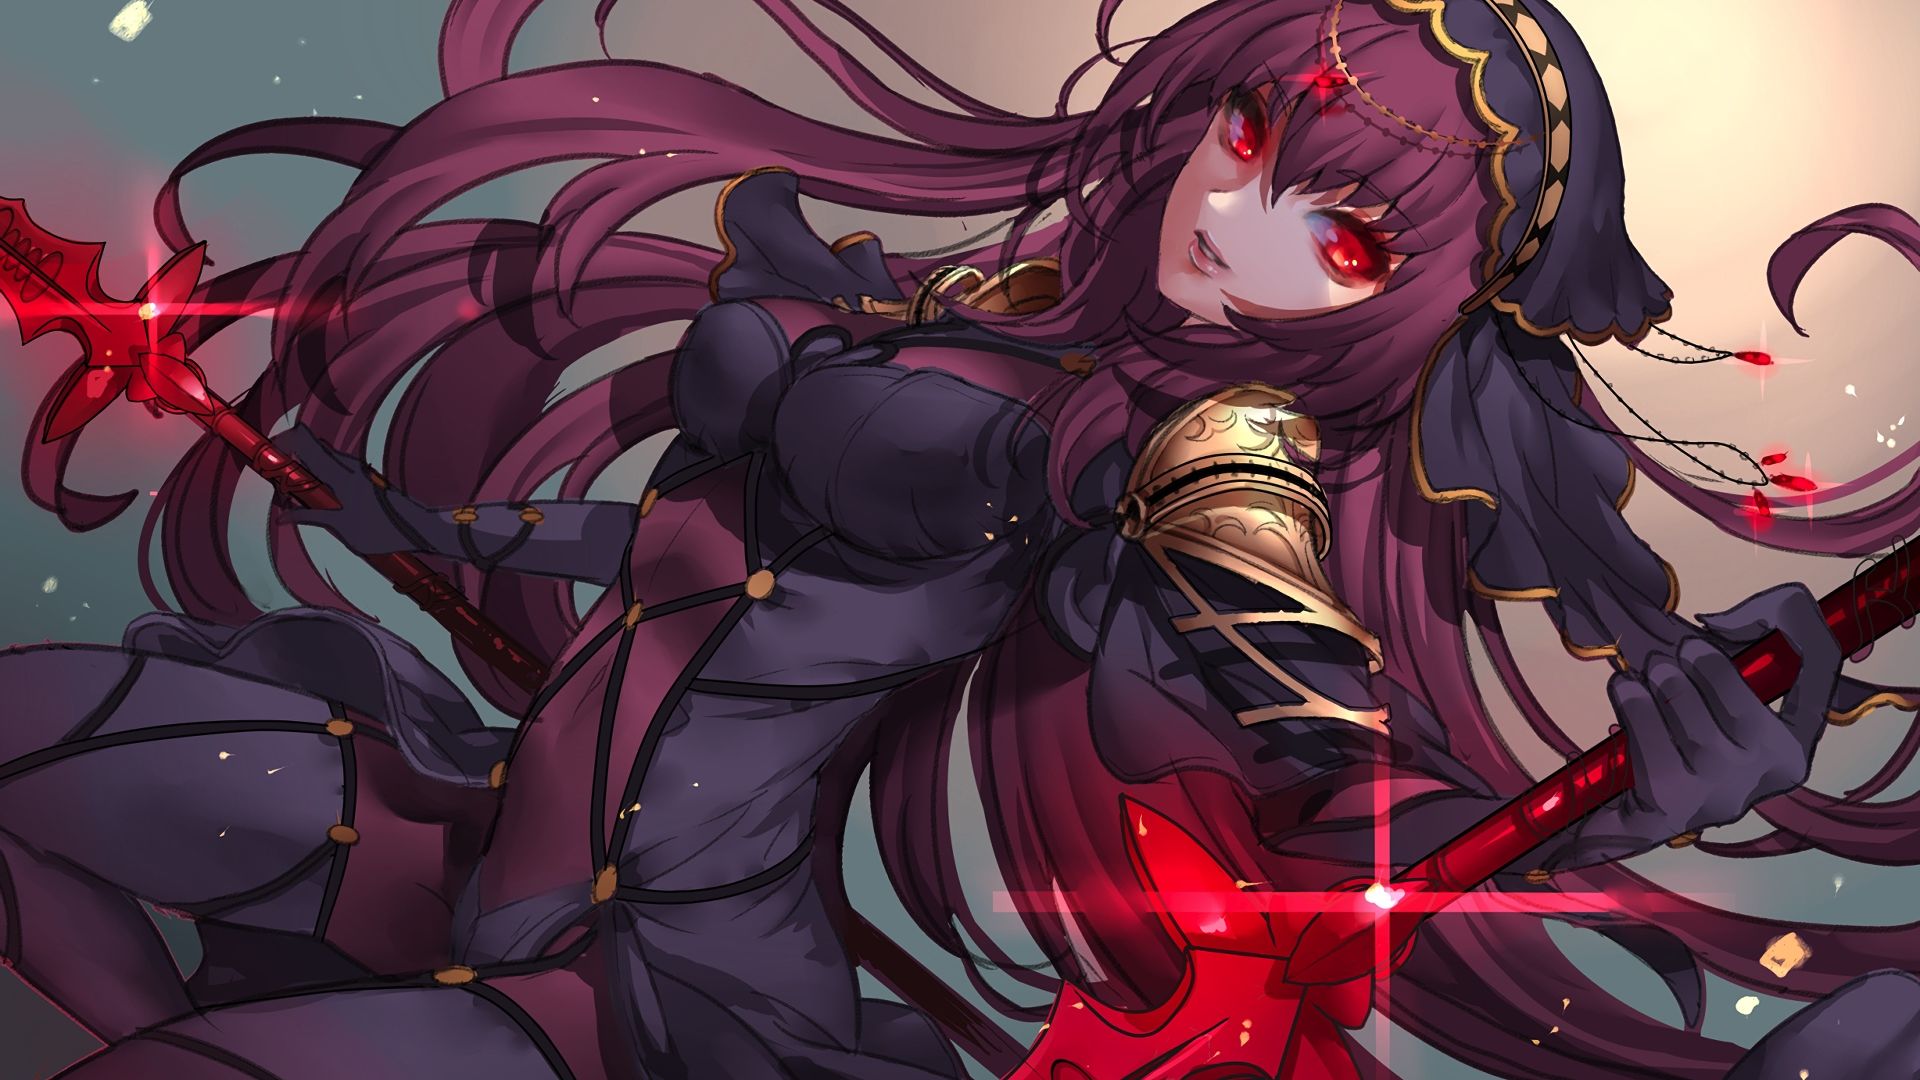 Desktop Wallpaper Scathach, Fate/Grand Order, Anime Girl, Hd Image,  Picture, Background, 2ea812